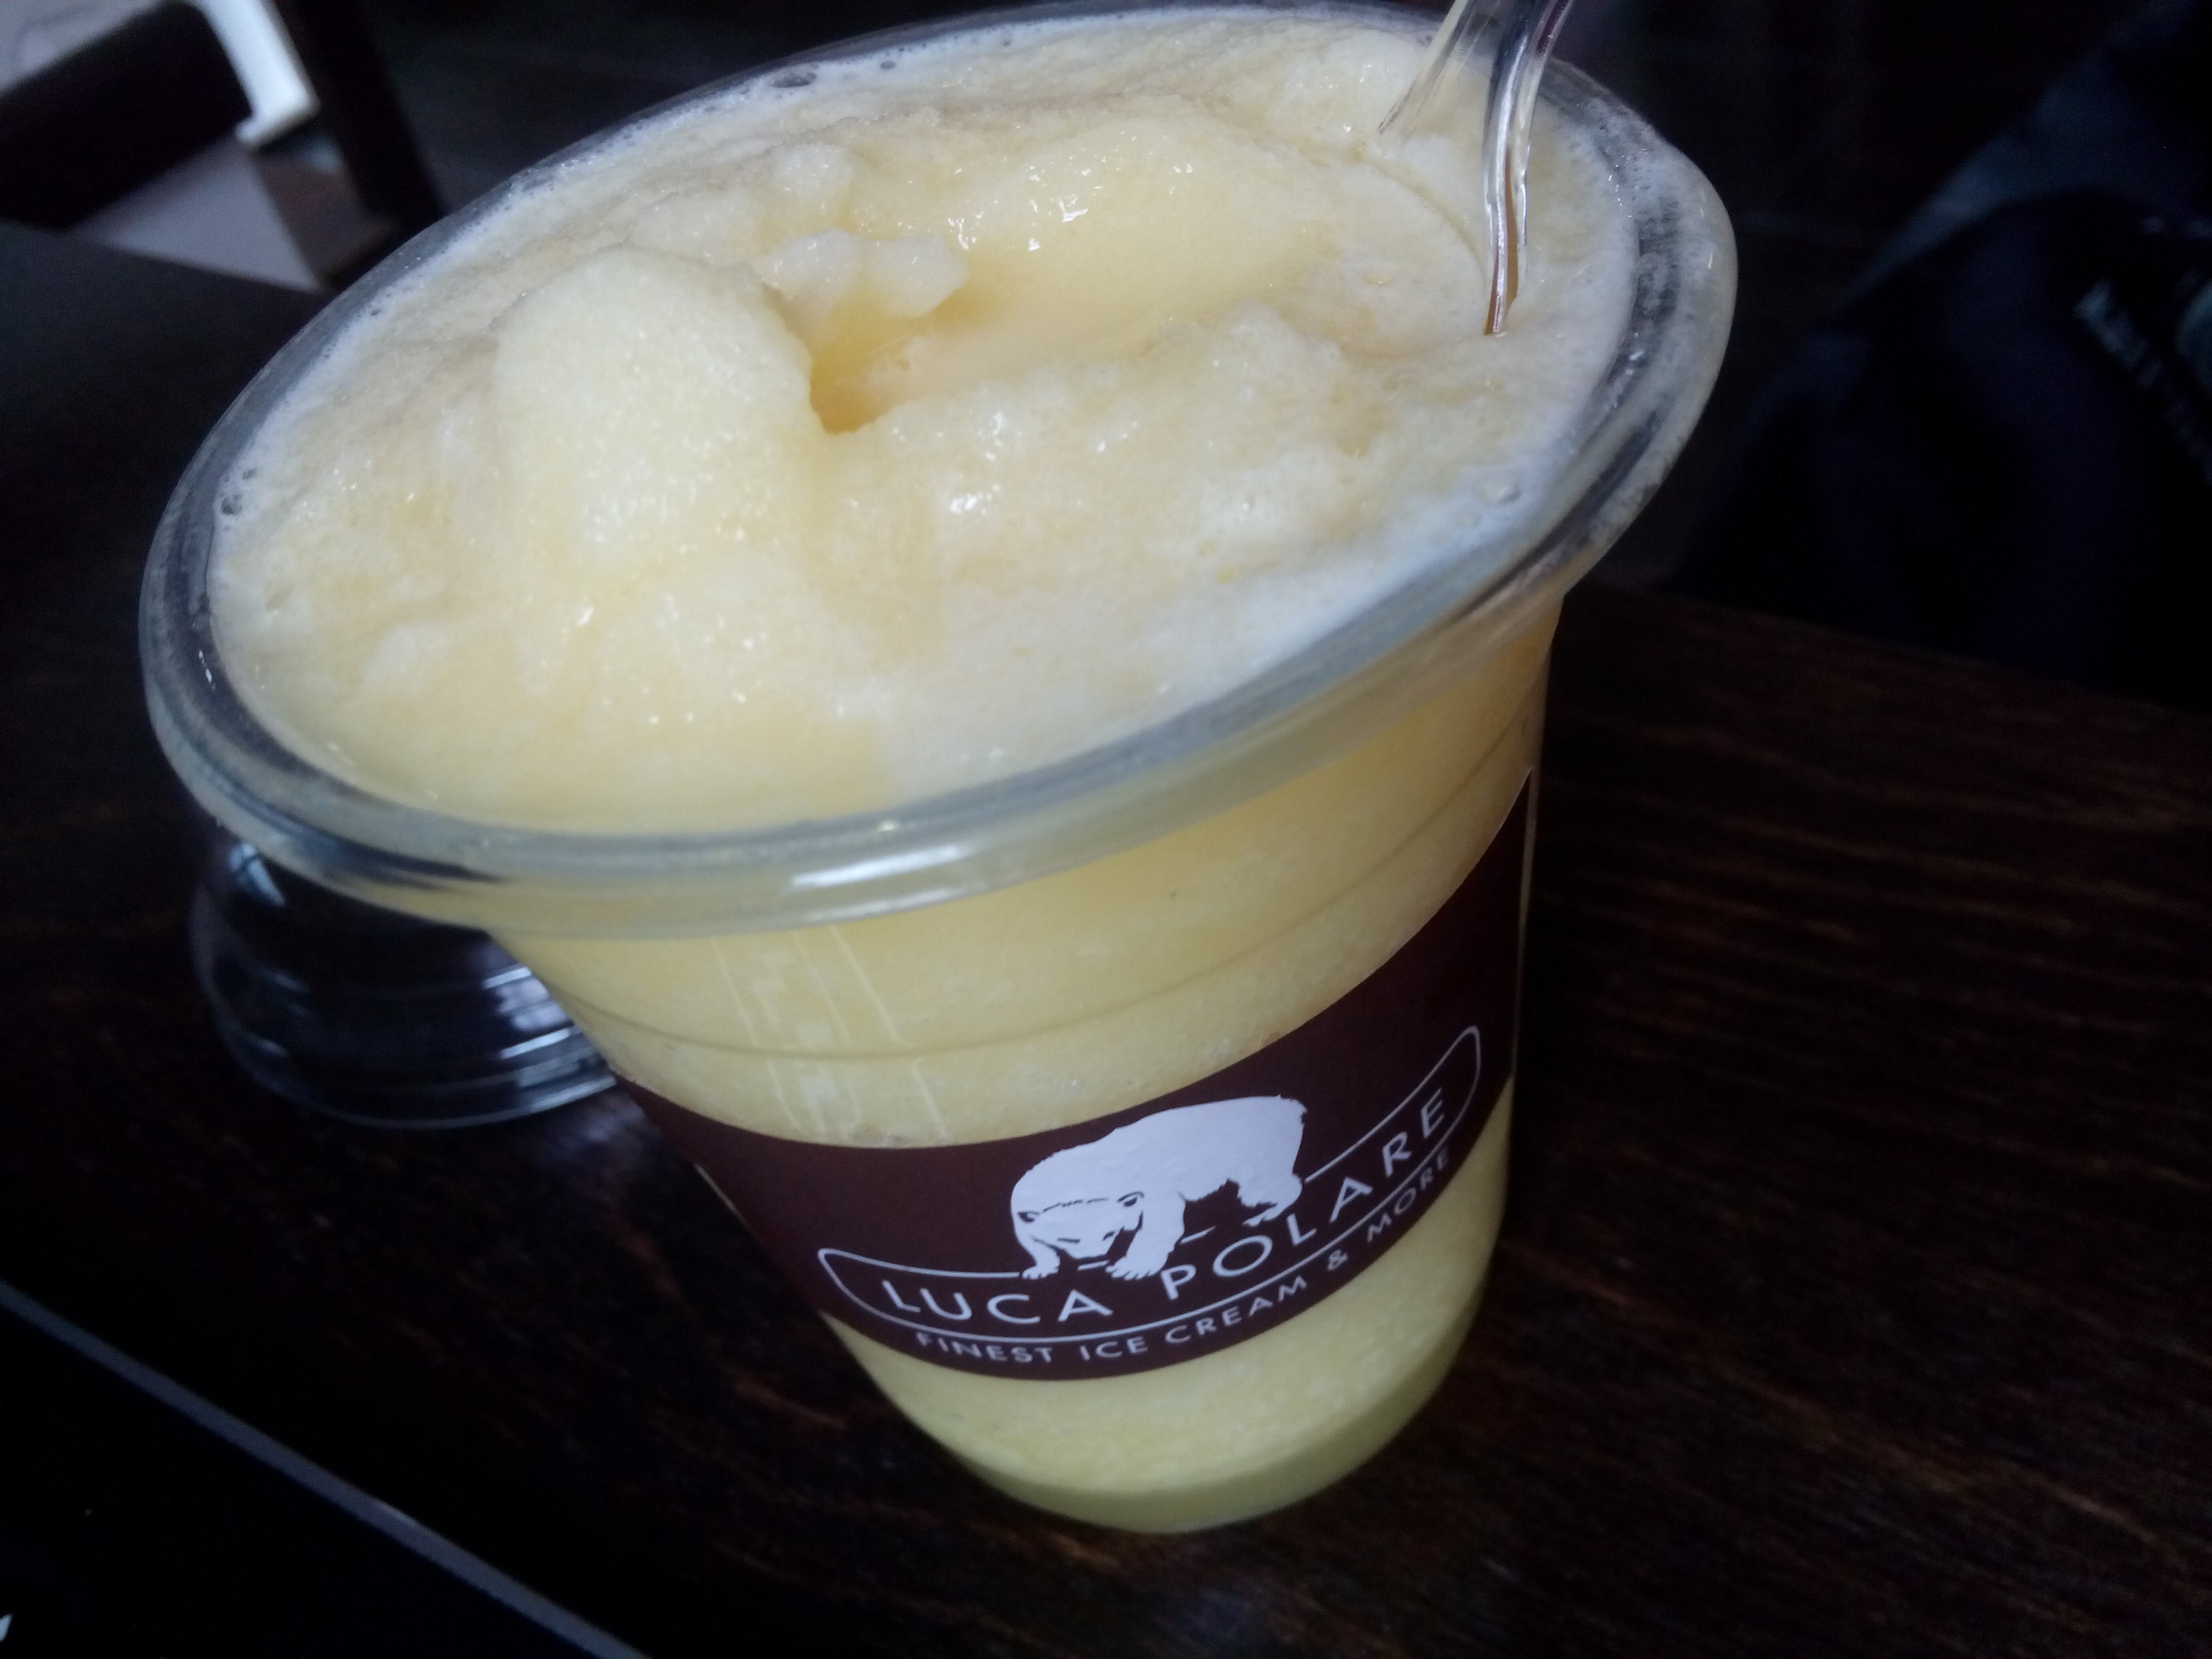 A plastic cup with a brown Luca Polare label, containing yellow slush